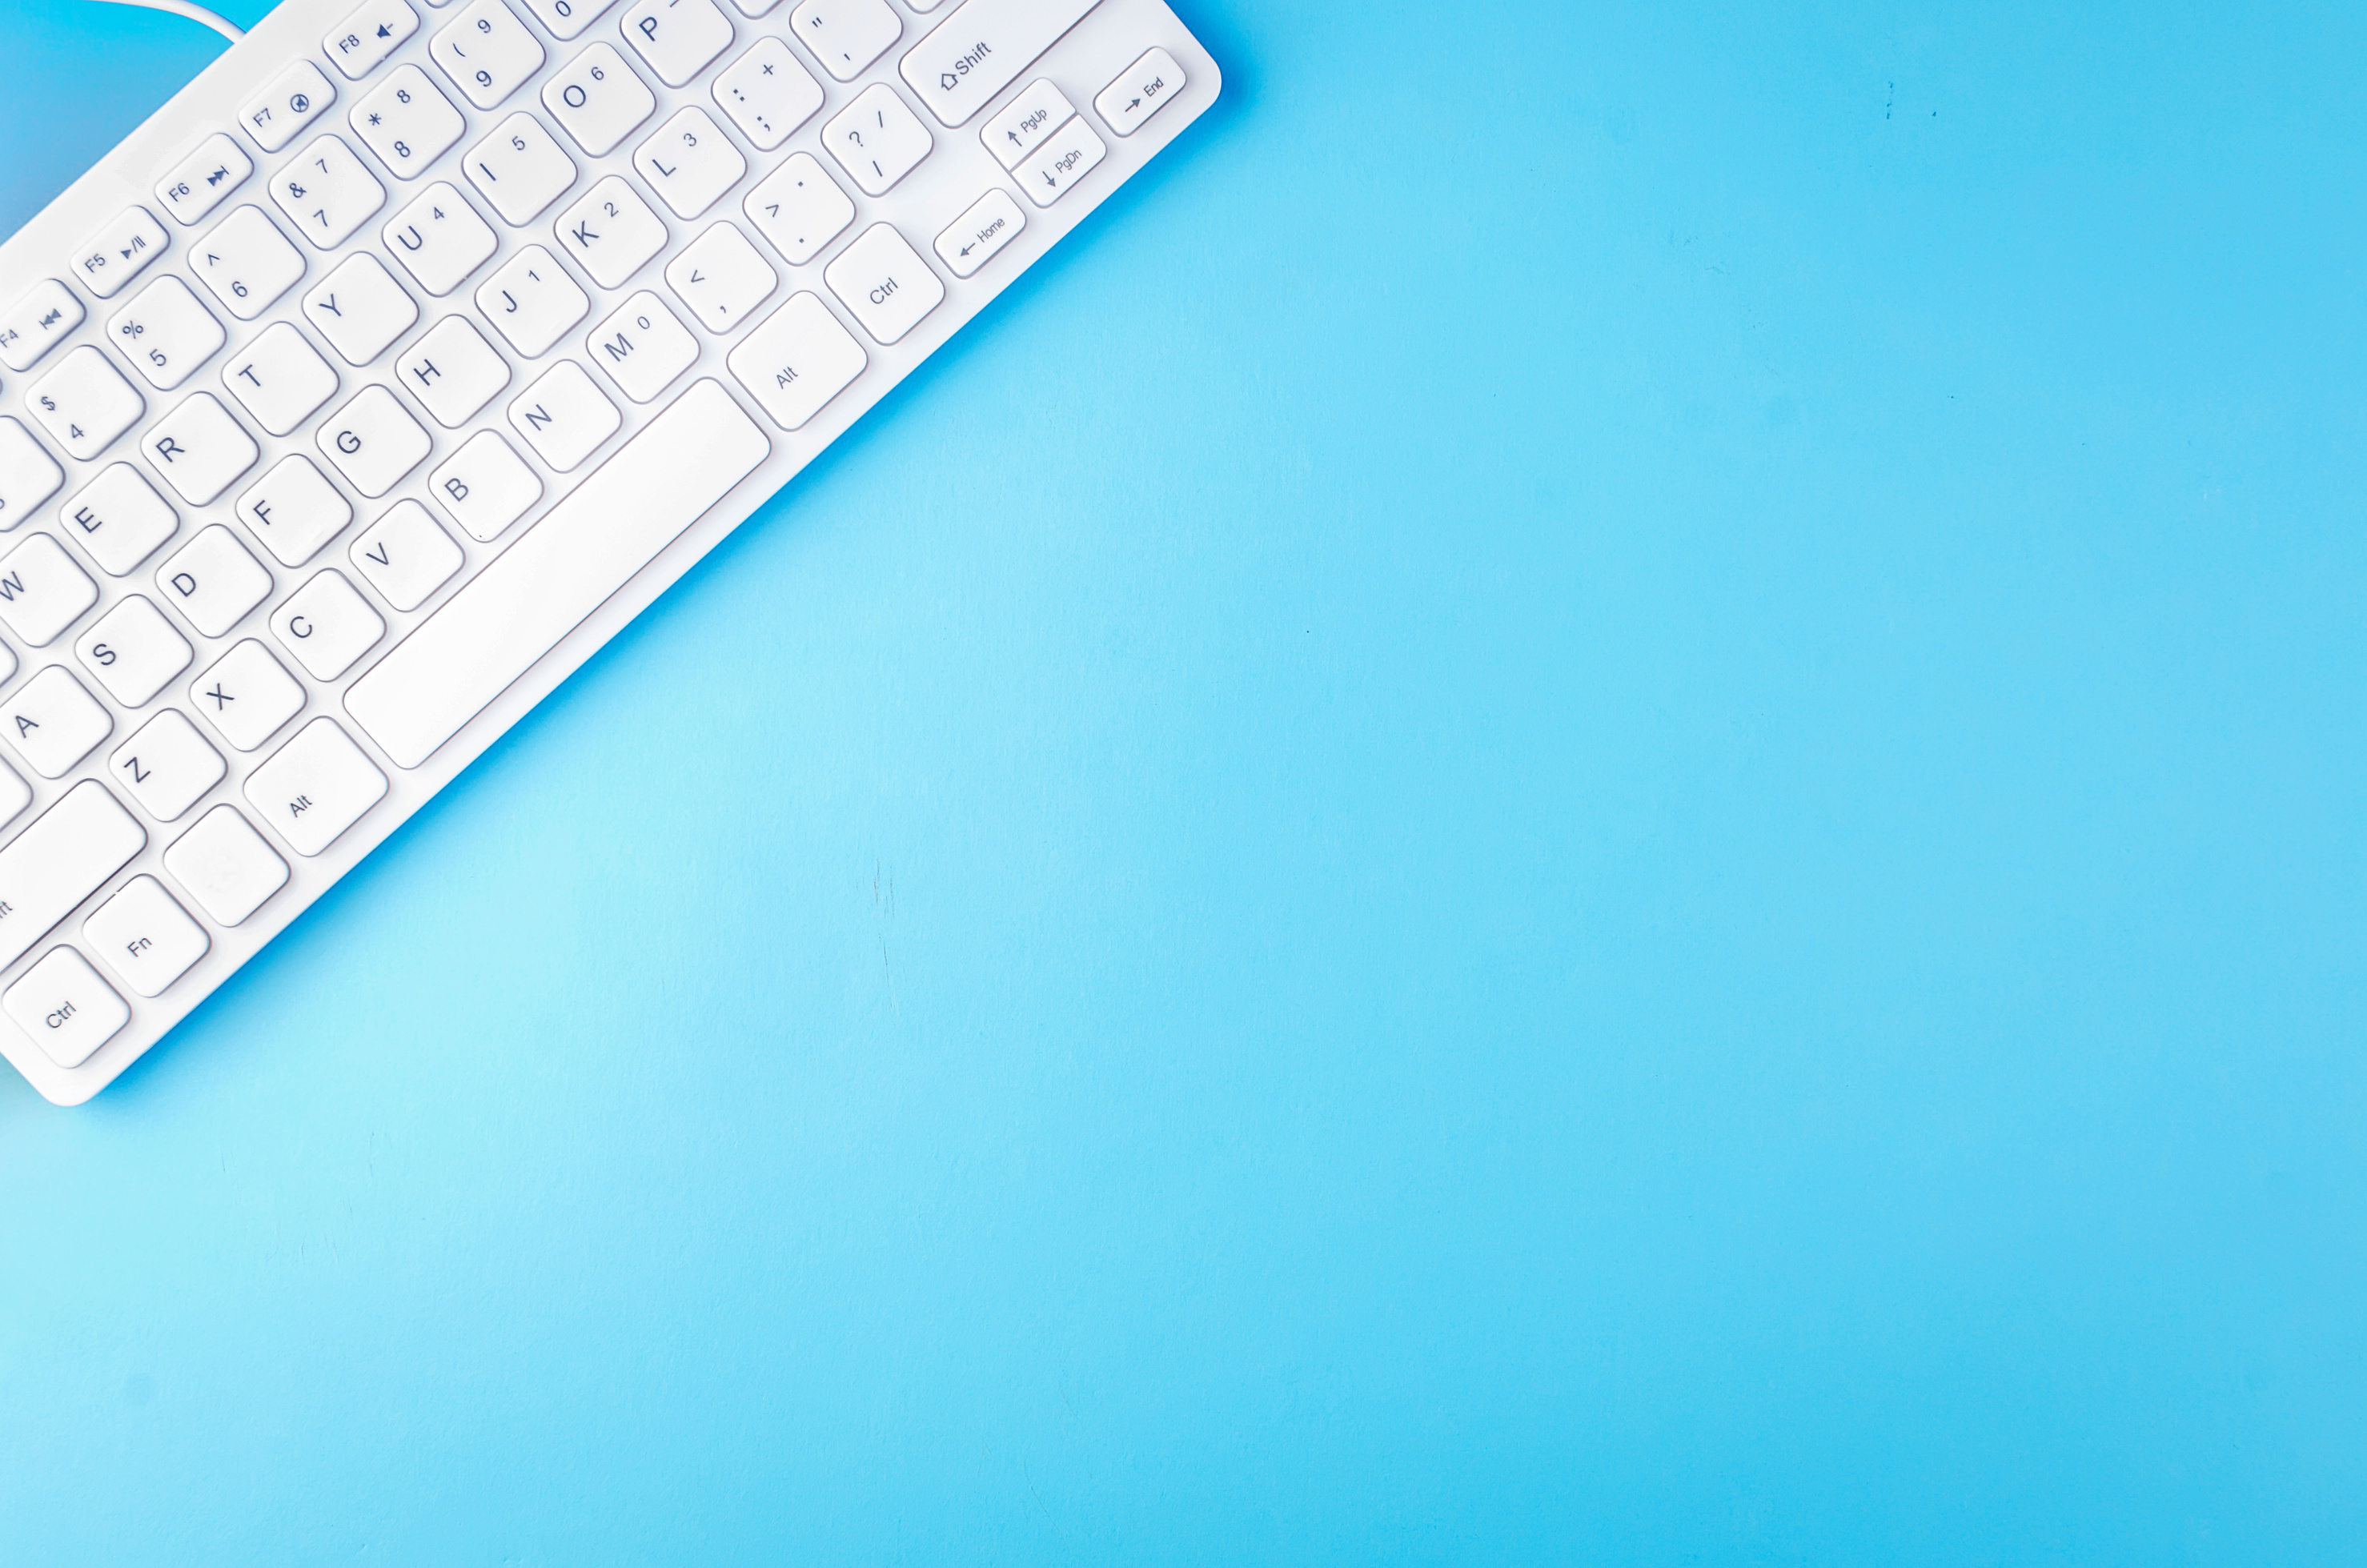 Top View of White Keyboard on Blue.Woman Freelance Background.